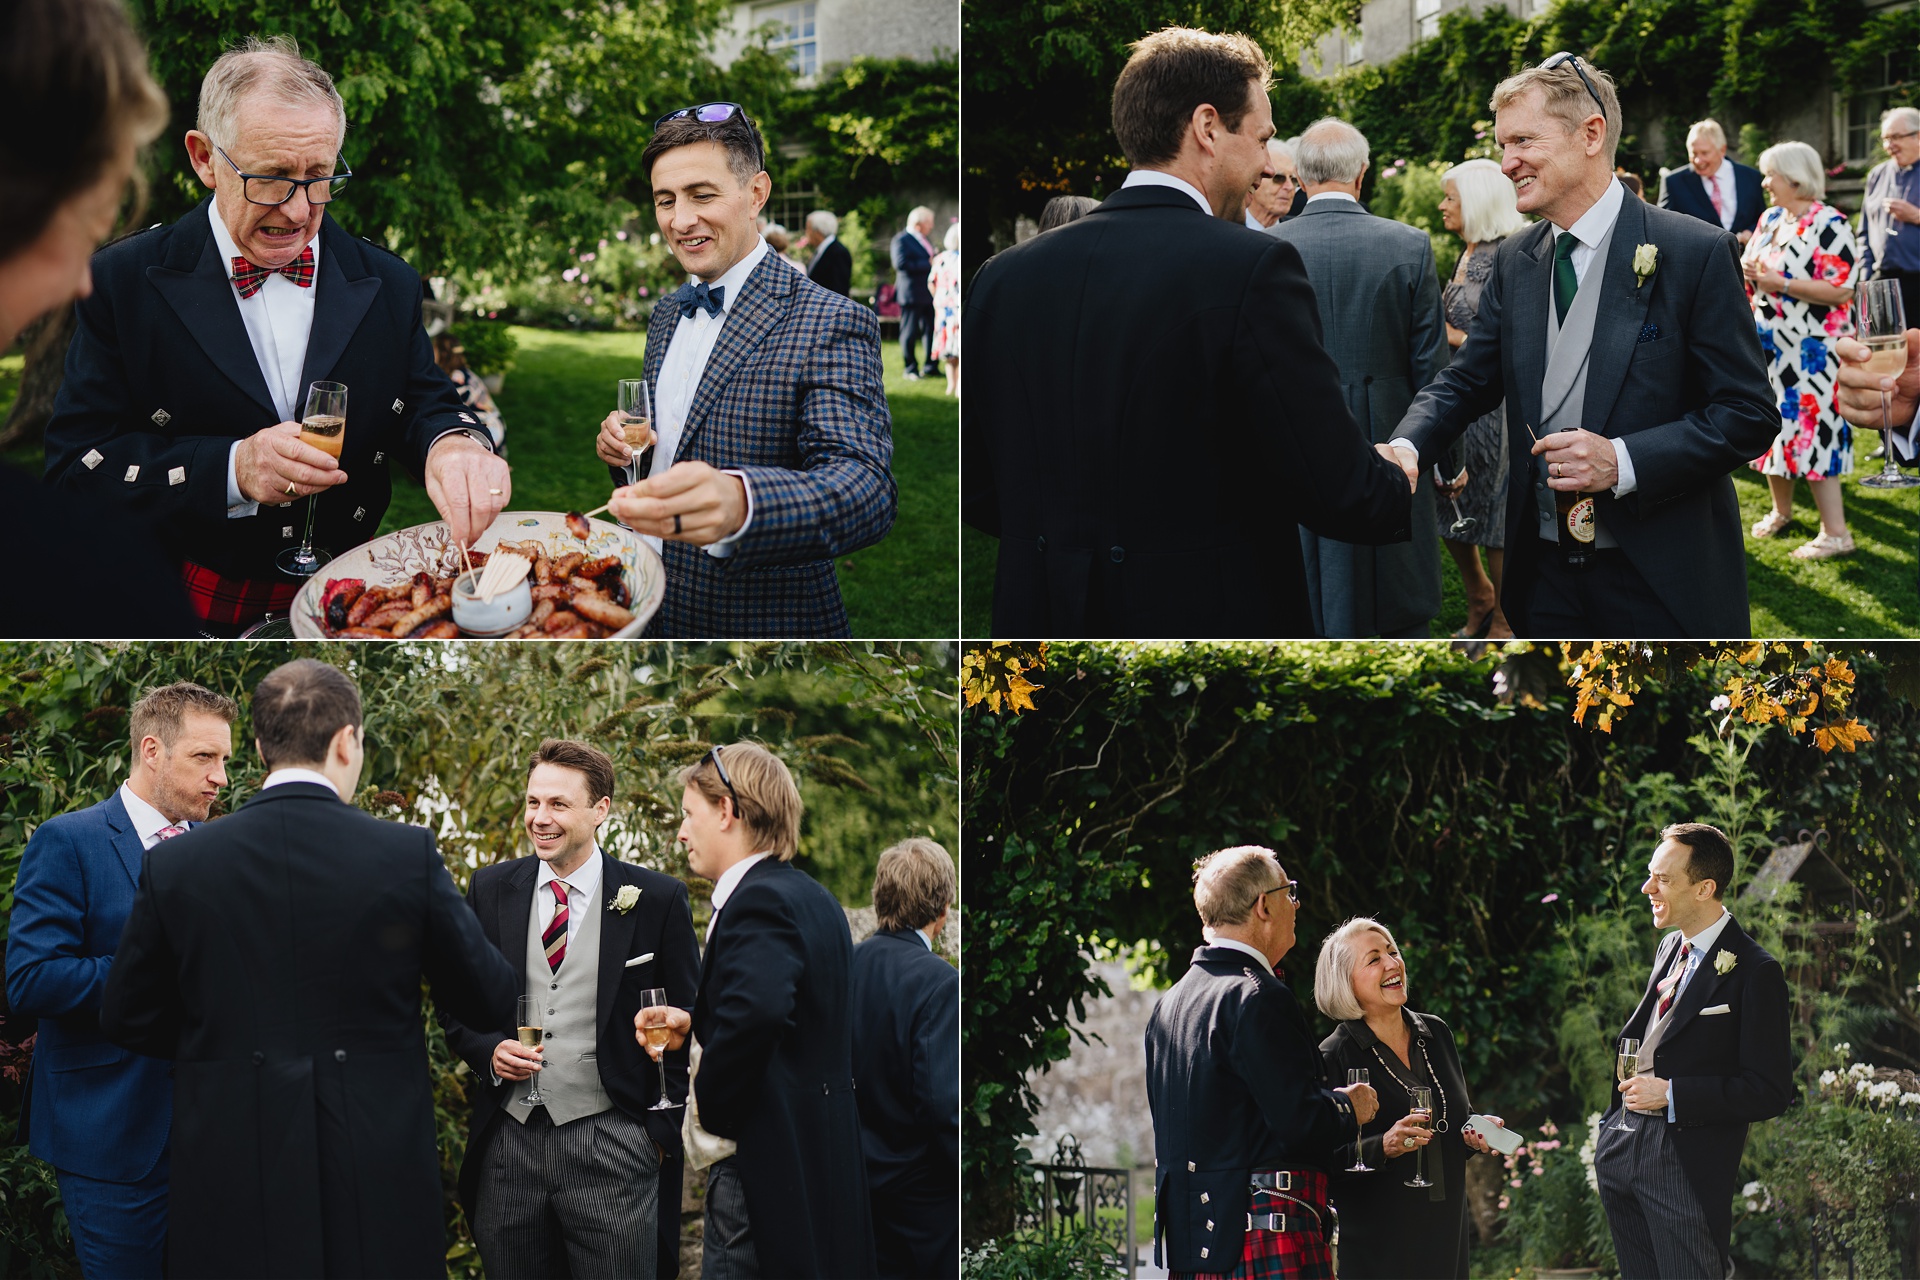 Wedding guests chatting and laughing in a stunning garden venue